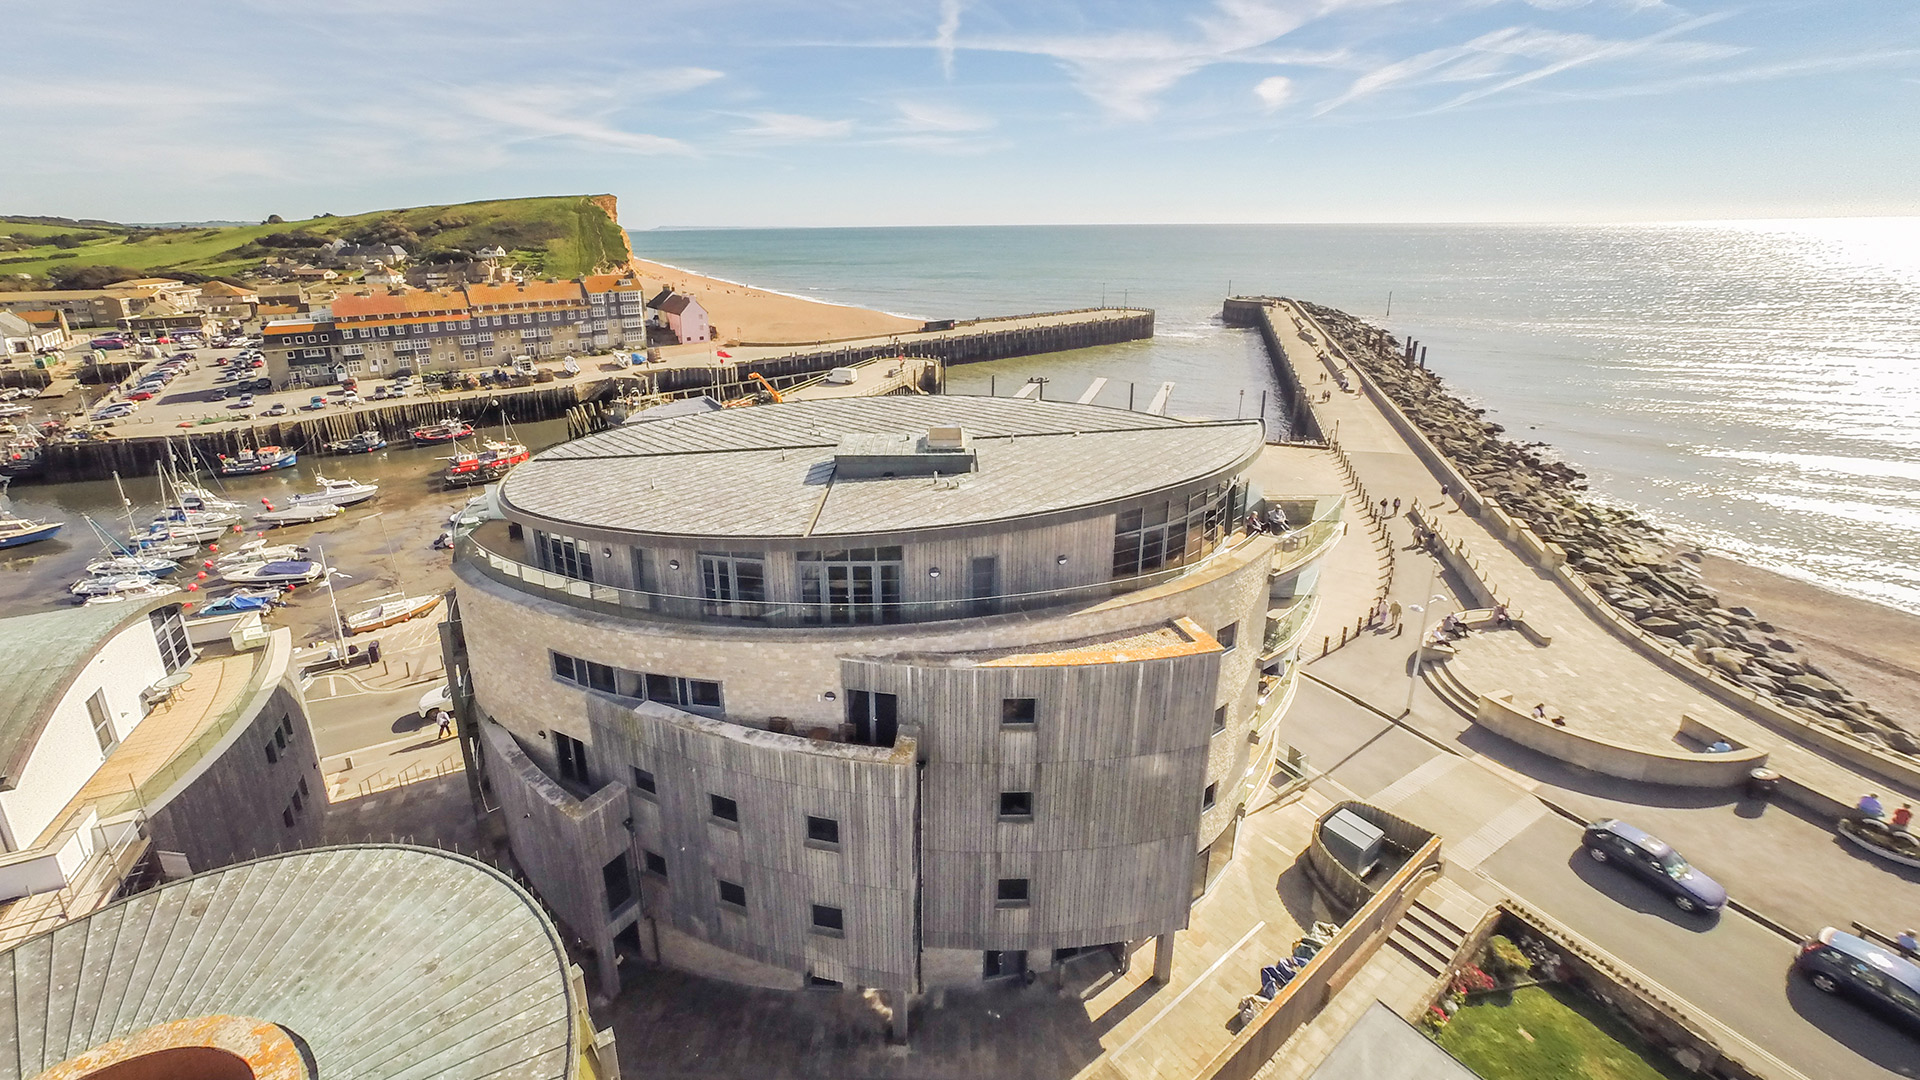 aerial view of circular building with wooden cladding and lovely sea views